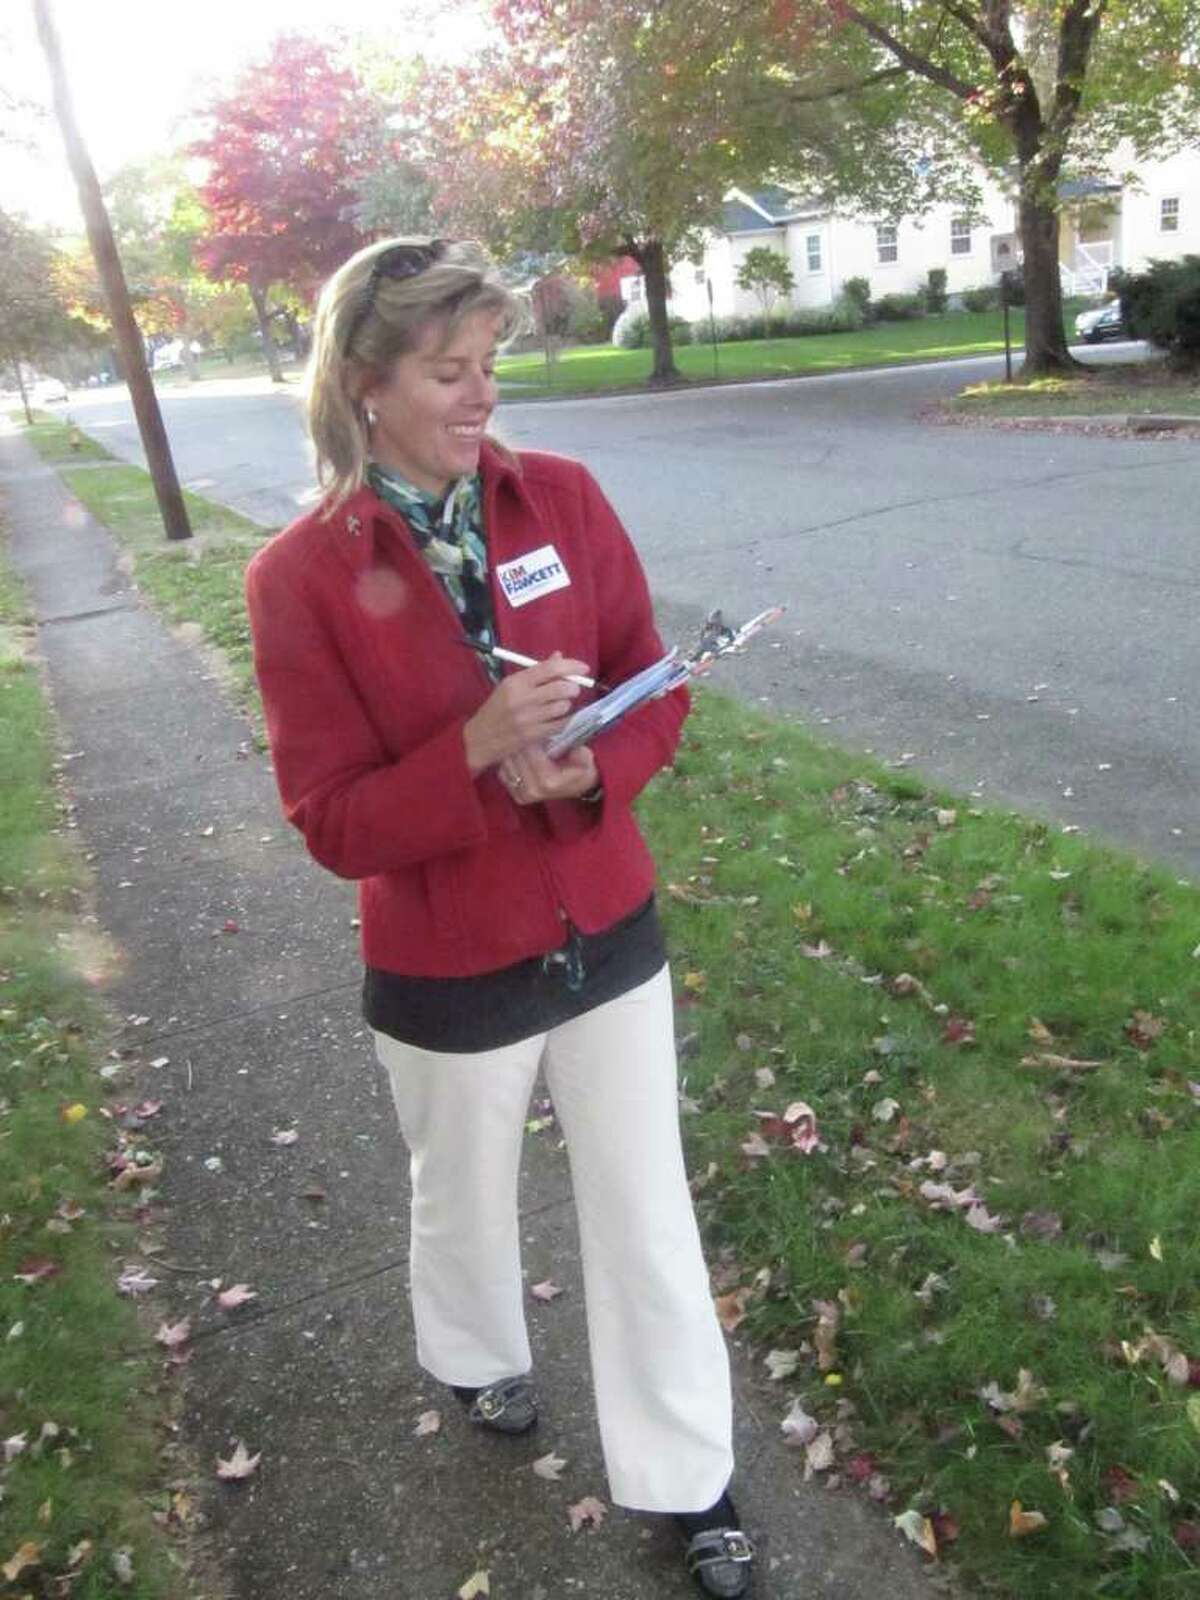 Kim Fawcett, state representative for the 133rd Assembly District, walked door-to-door on Partridge Lane on Tuesday afternoon. She has been making personal connections since May.